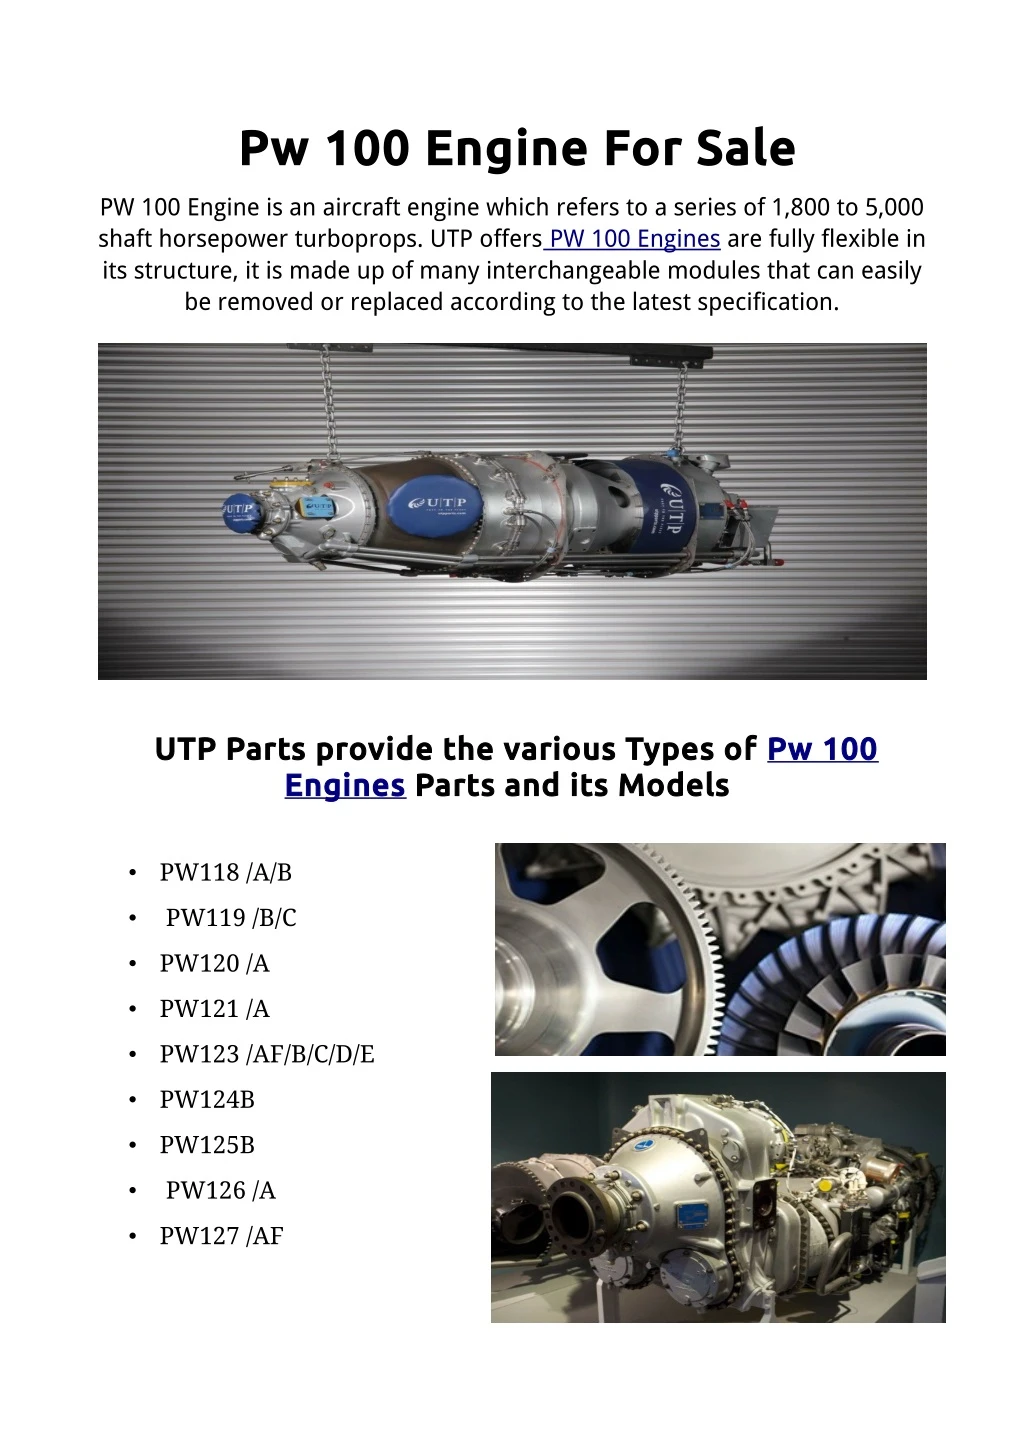 pw 100 engine for sale pw 100 engine for sale